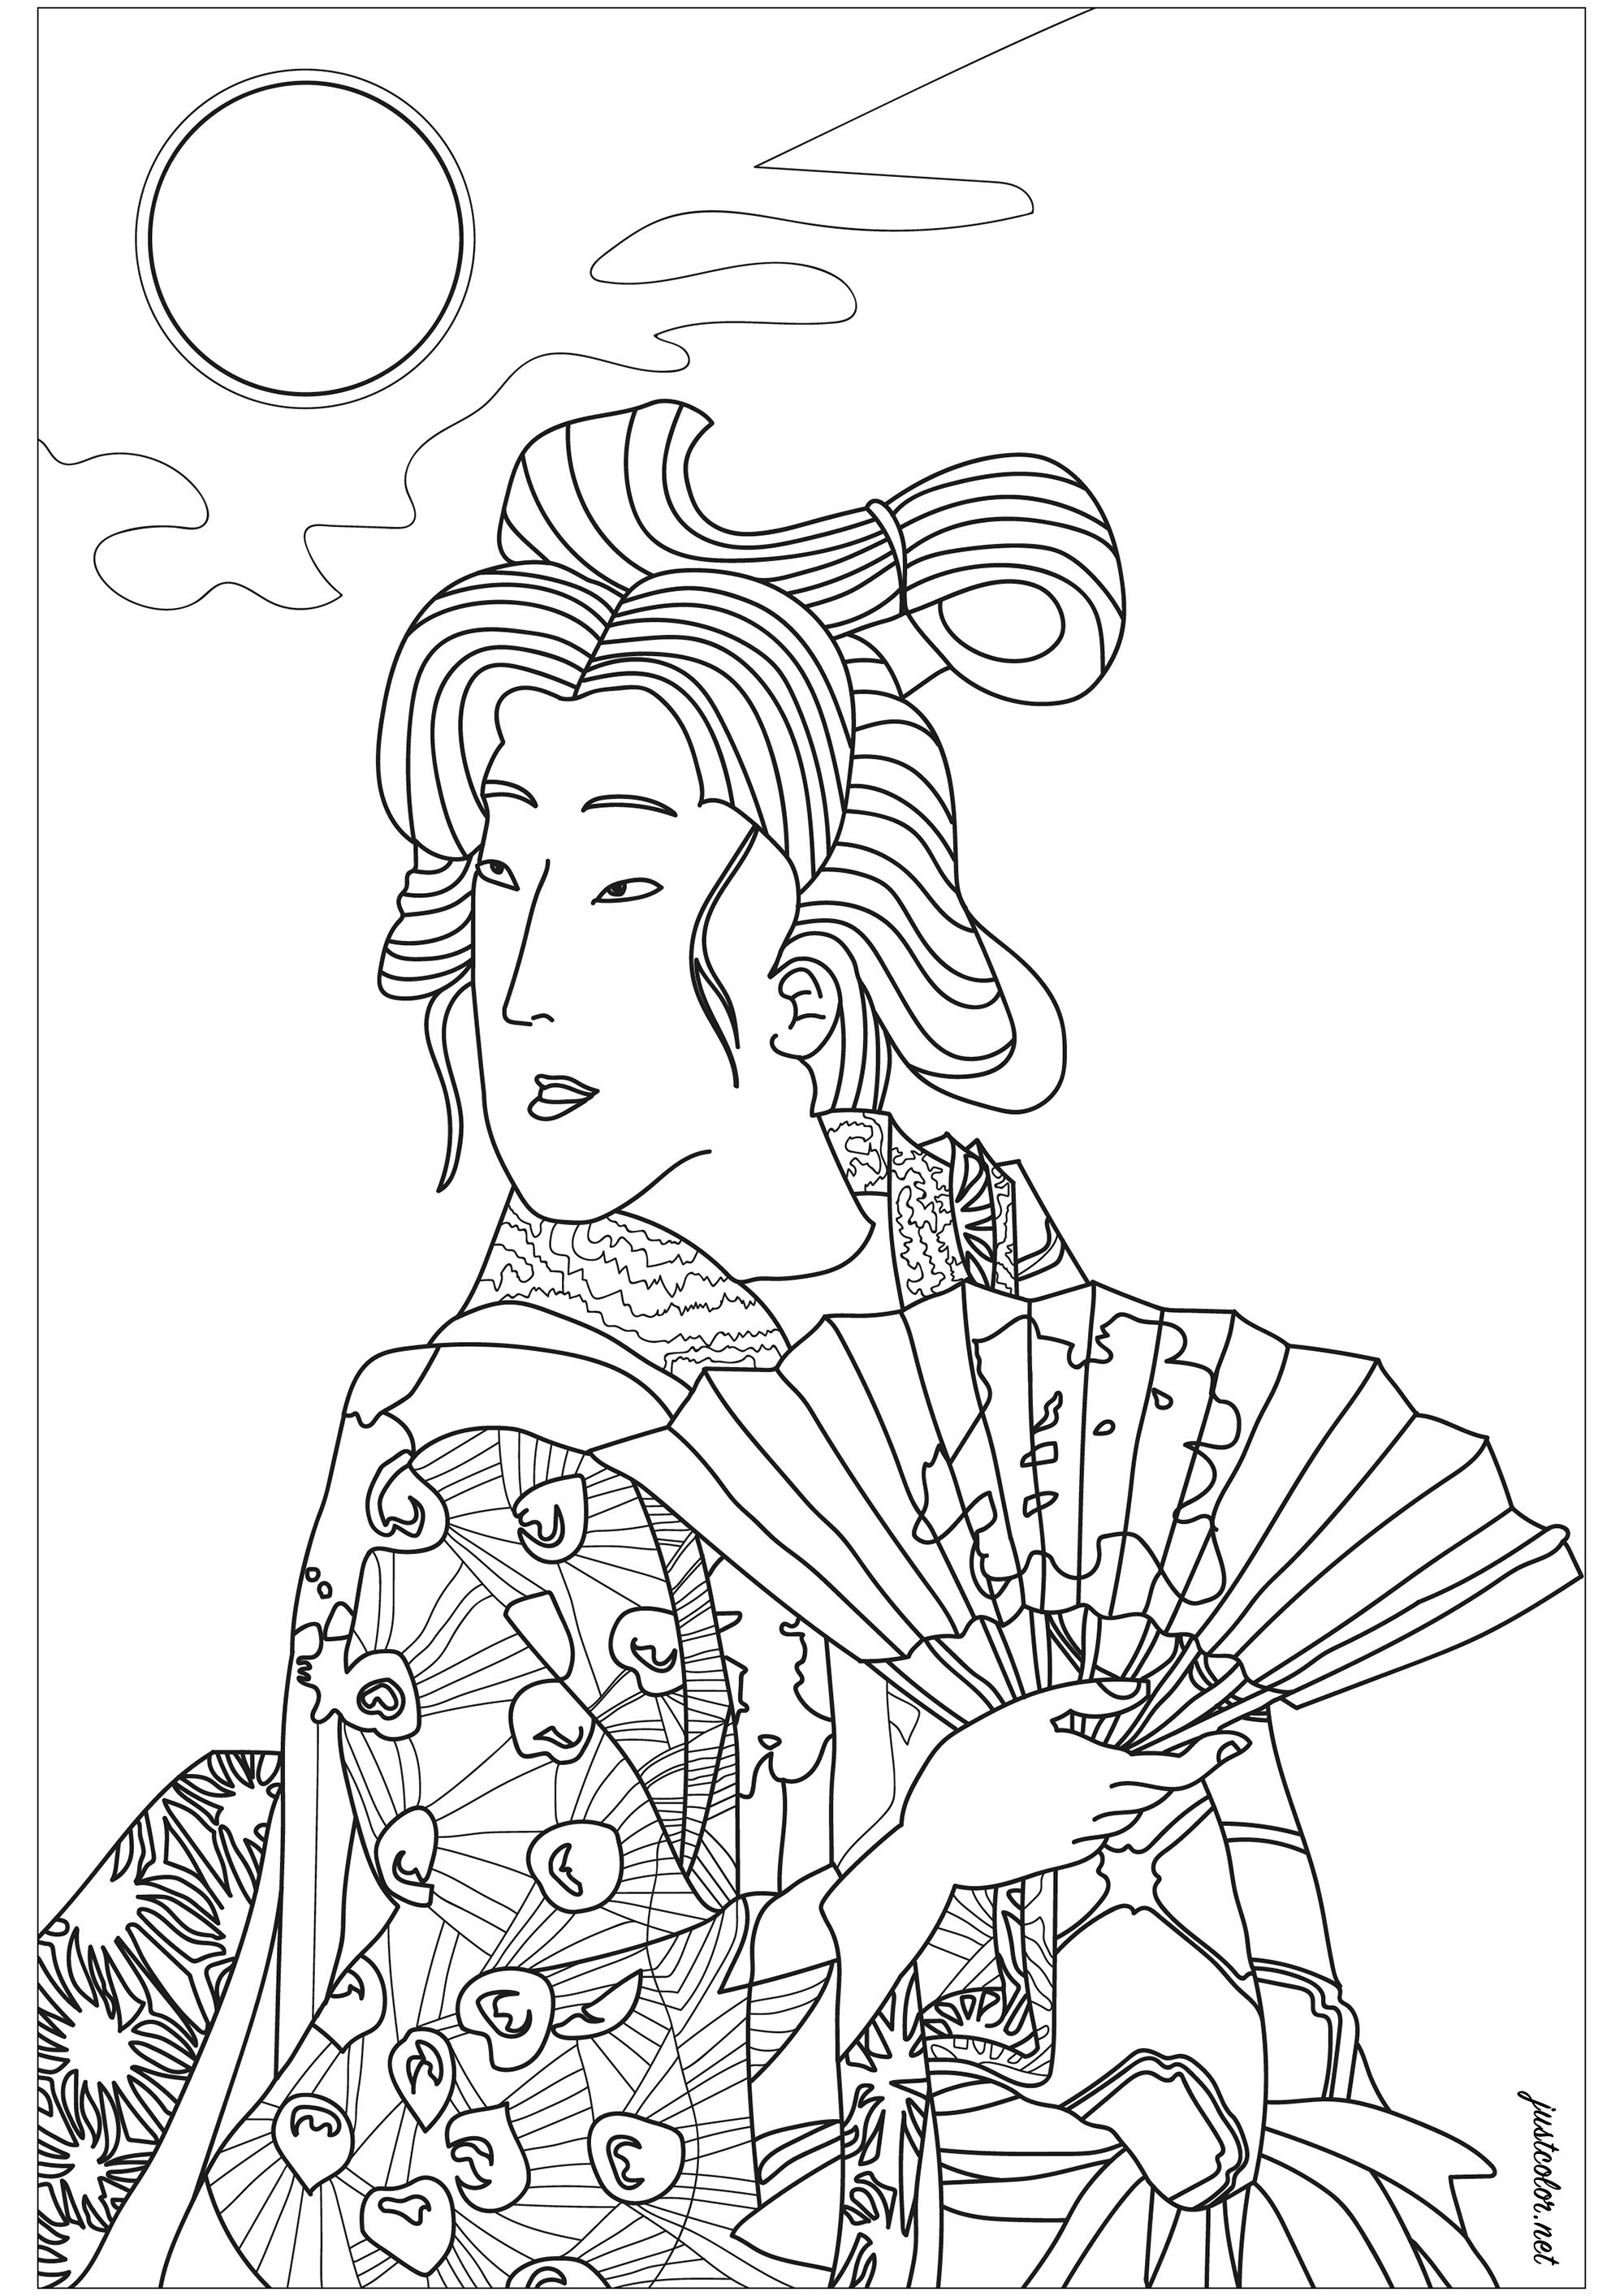 Geisha with a fan. Portrait of a Geisha from a 19th century Japanese print by Yoshitoshi depicting a woman in kimono holding her fan under a full moon, Artist : Morgan